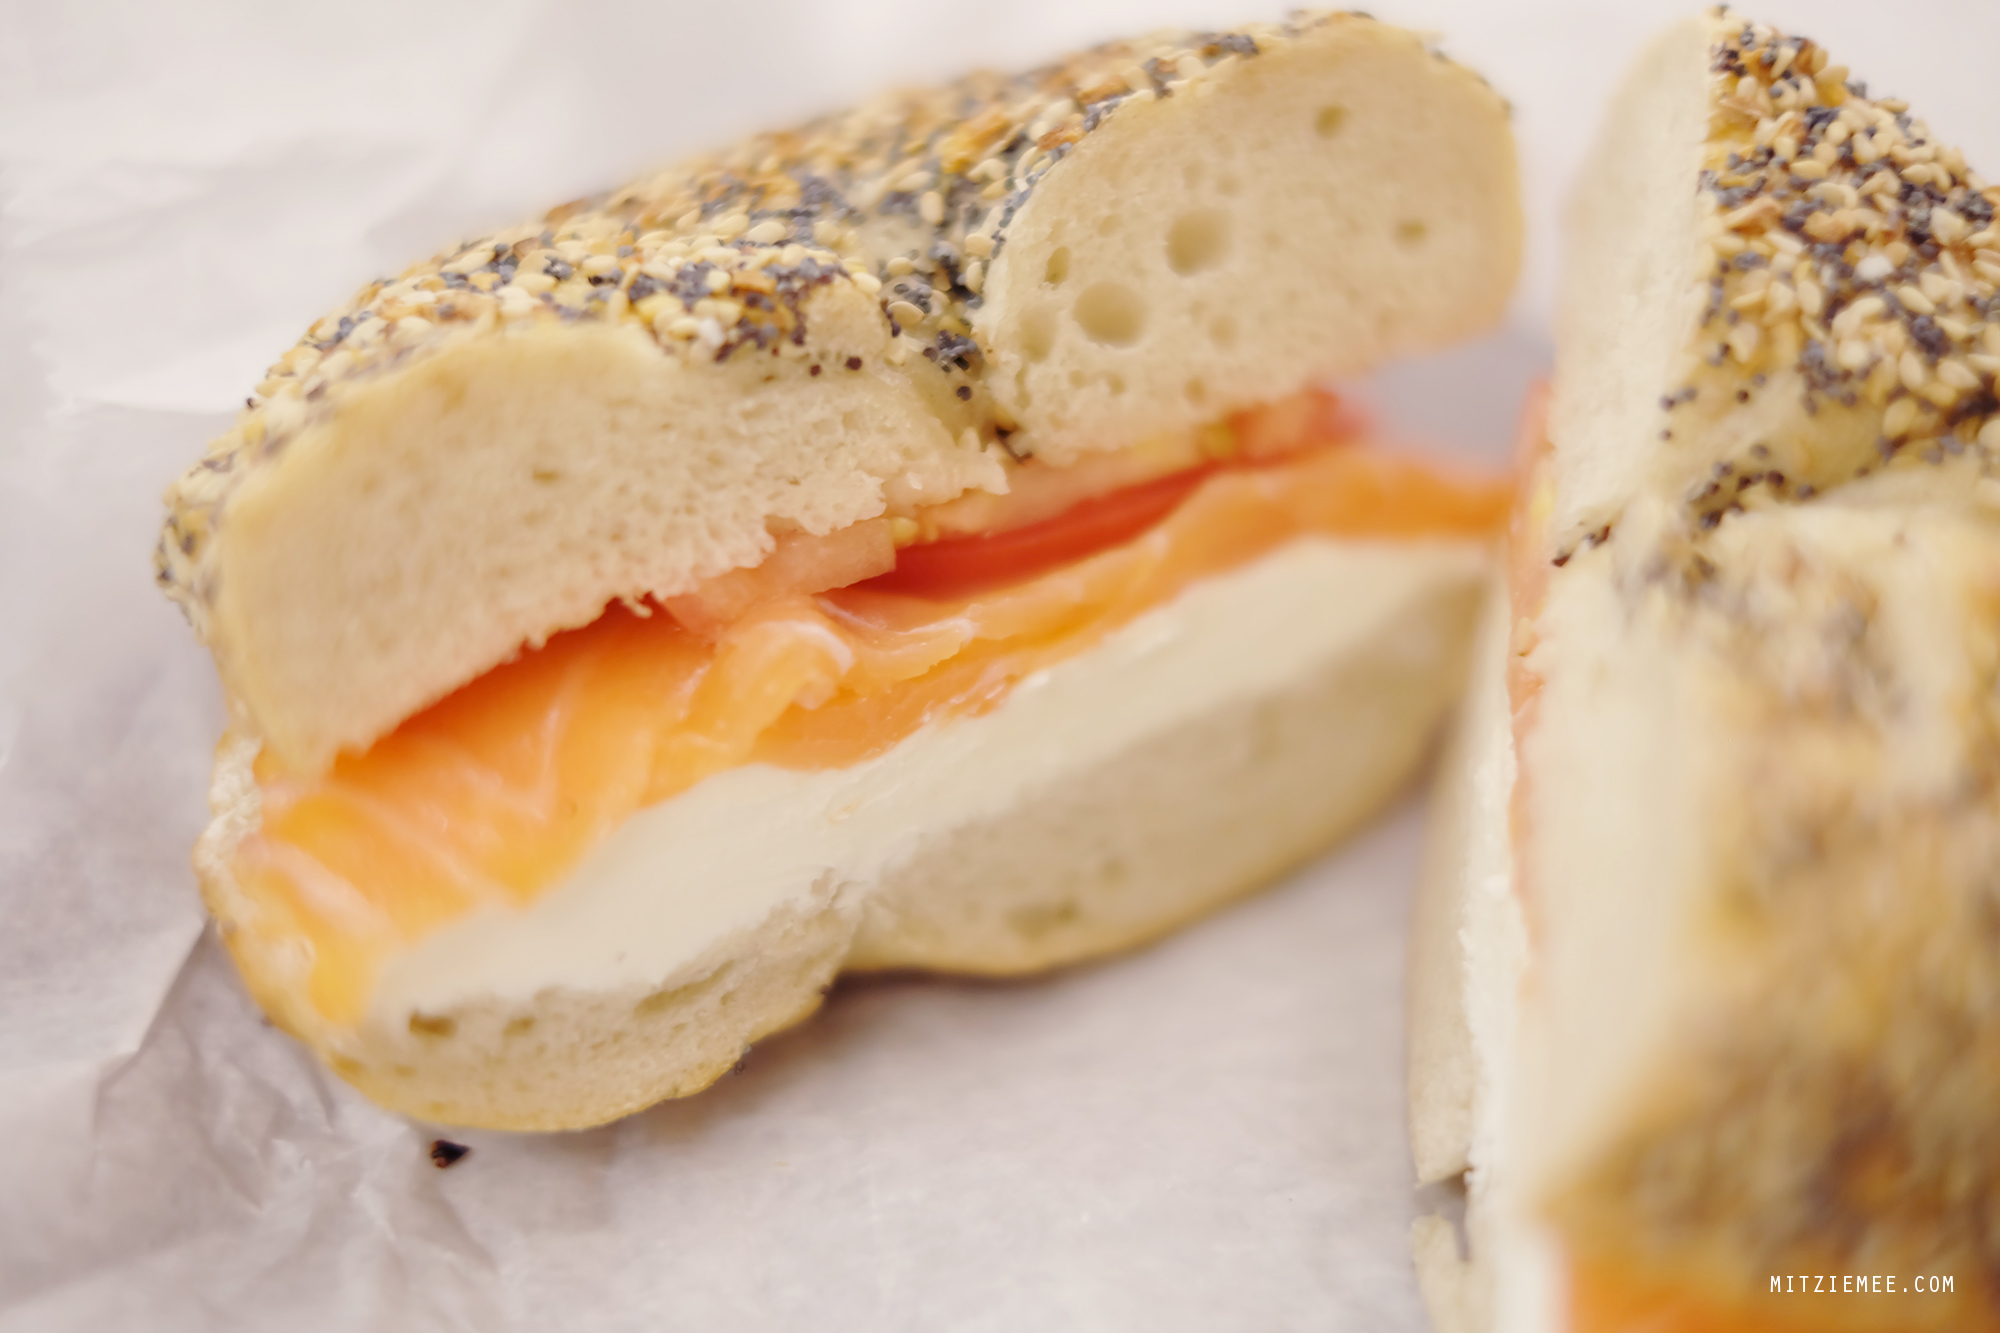 Everything Bagel at Ess-a-Bagel, New York